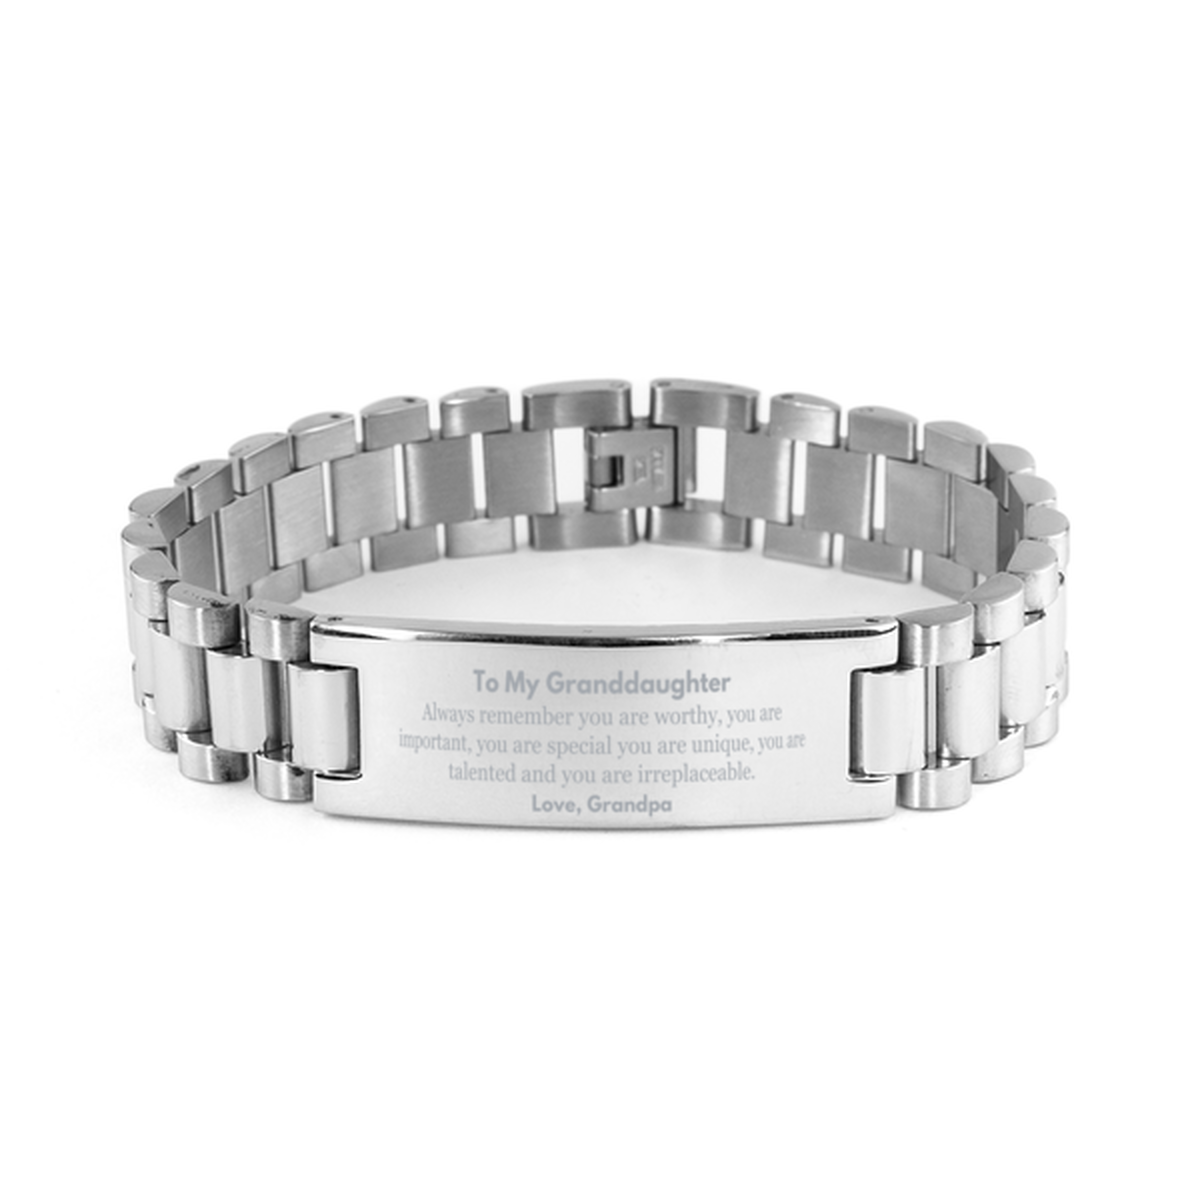 Granddaughter Birthday Gifts from Grandpa, Inspirational Ladder Stainless Steel Bracelet for Granddaughter Christmas Graduation Gifts for Granddaughter Always remember you are worthy, you are important. Love, Grandpa